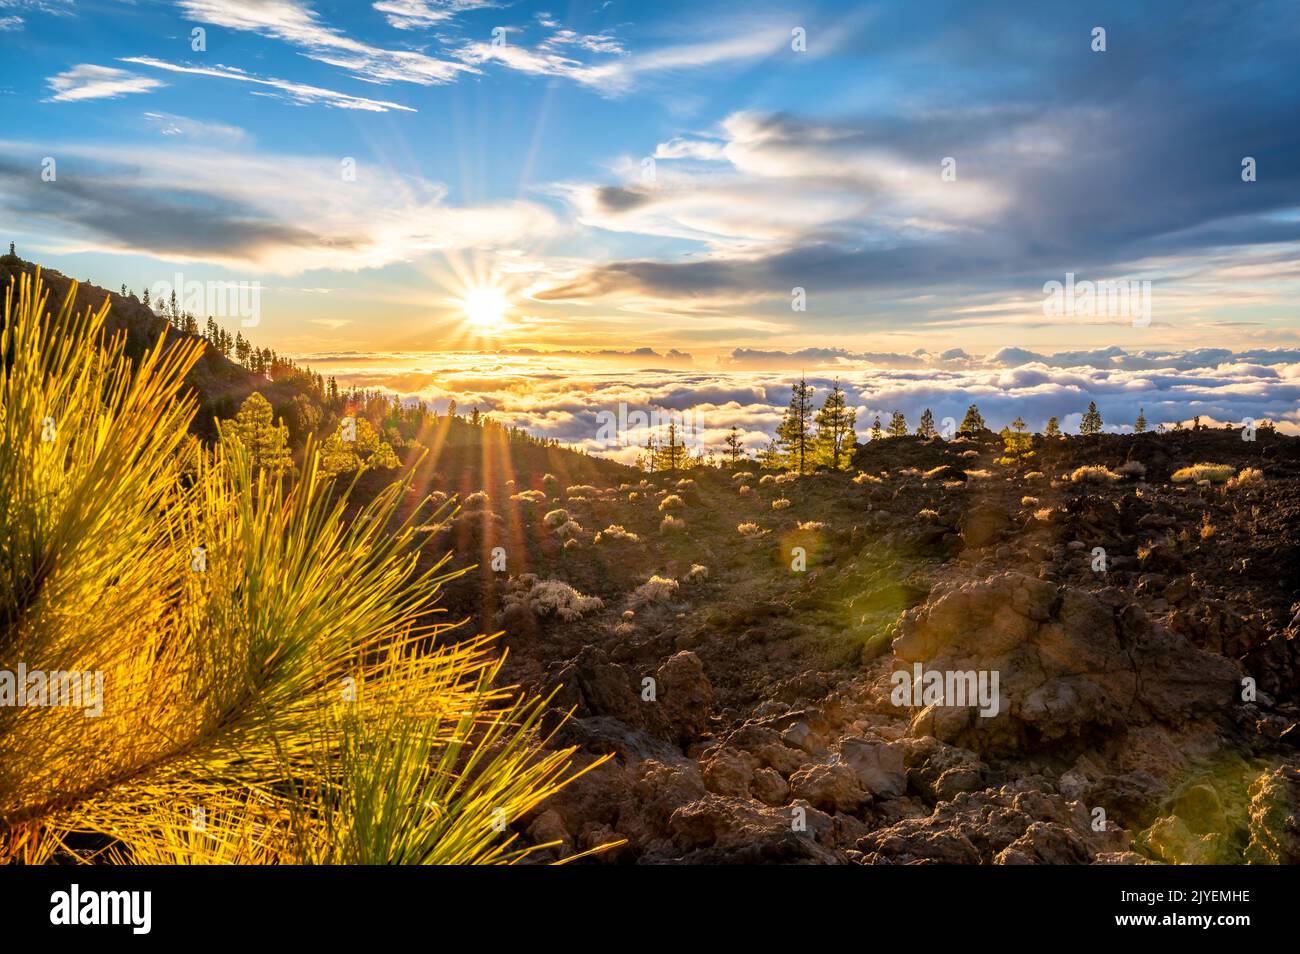 The sun sinks into the clouds on a mountainside in Tenerife Stock Photo